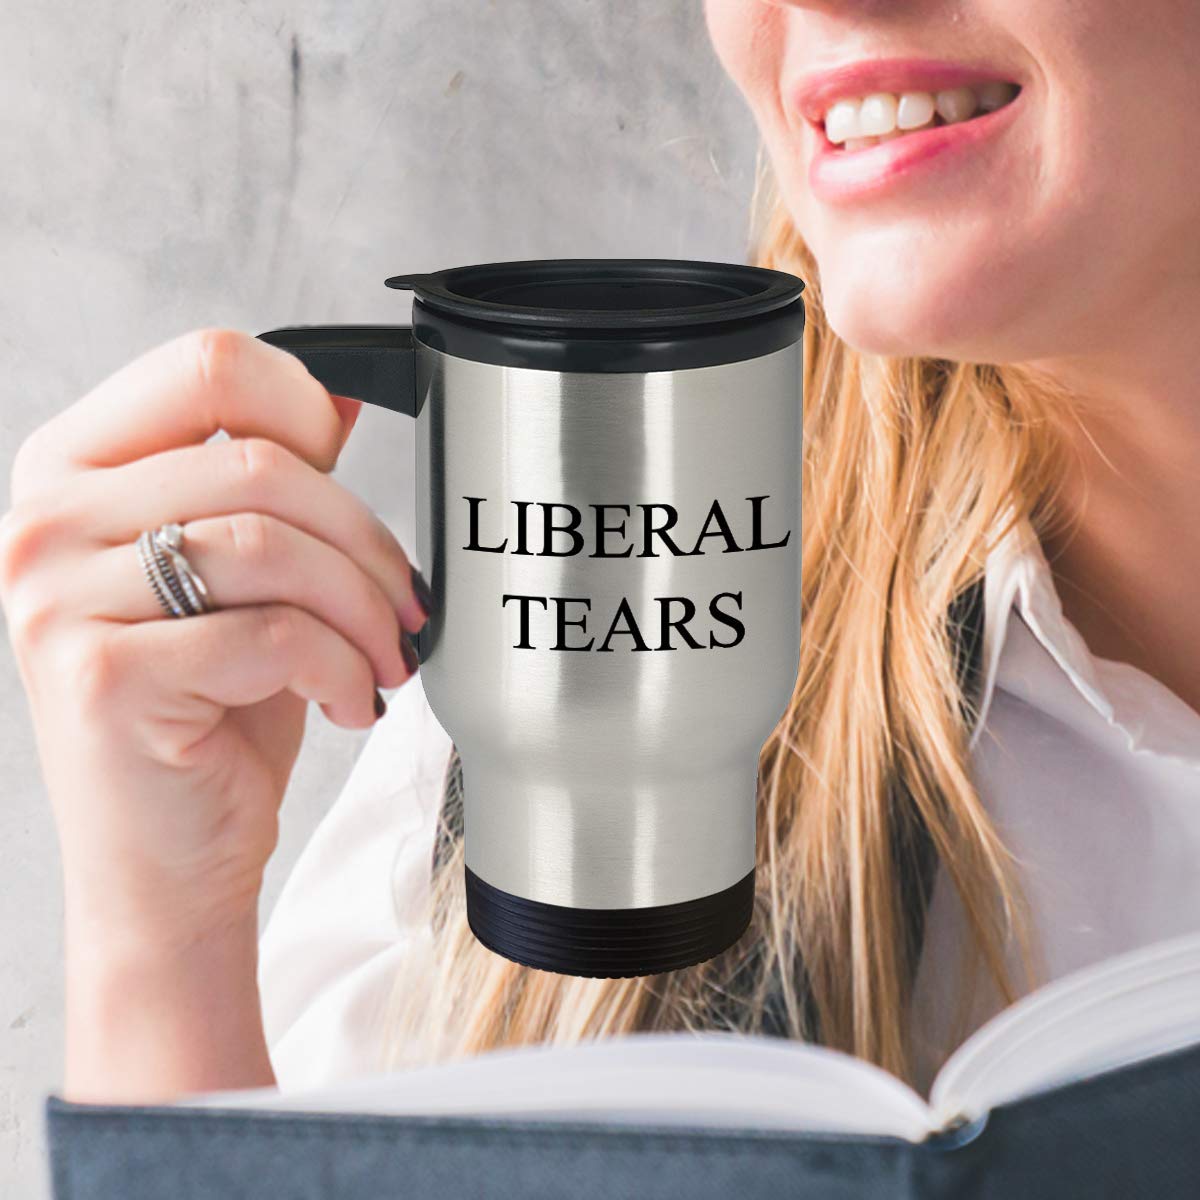 zapbest Funny Coffee Mug Liberal Tears Political Novelty Cup Coffee Mug For Republicans or Conservative 14 oz Travel Mugs